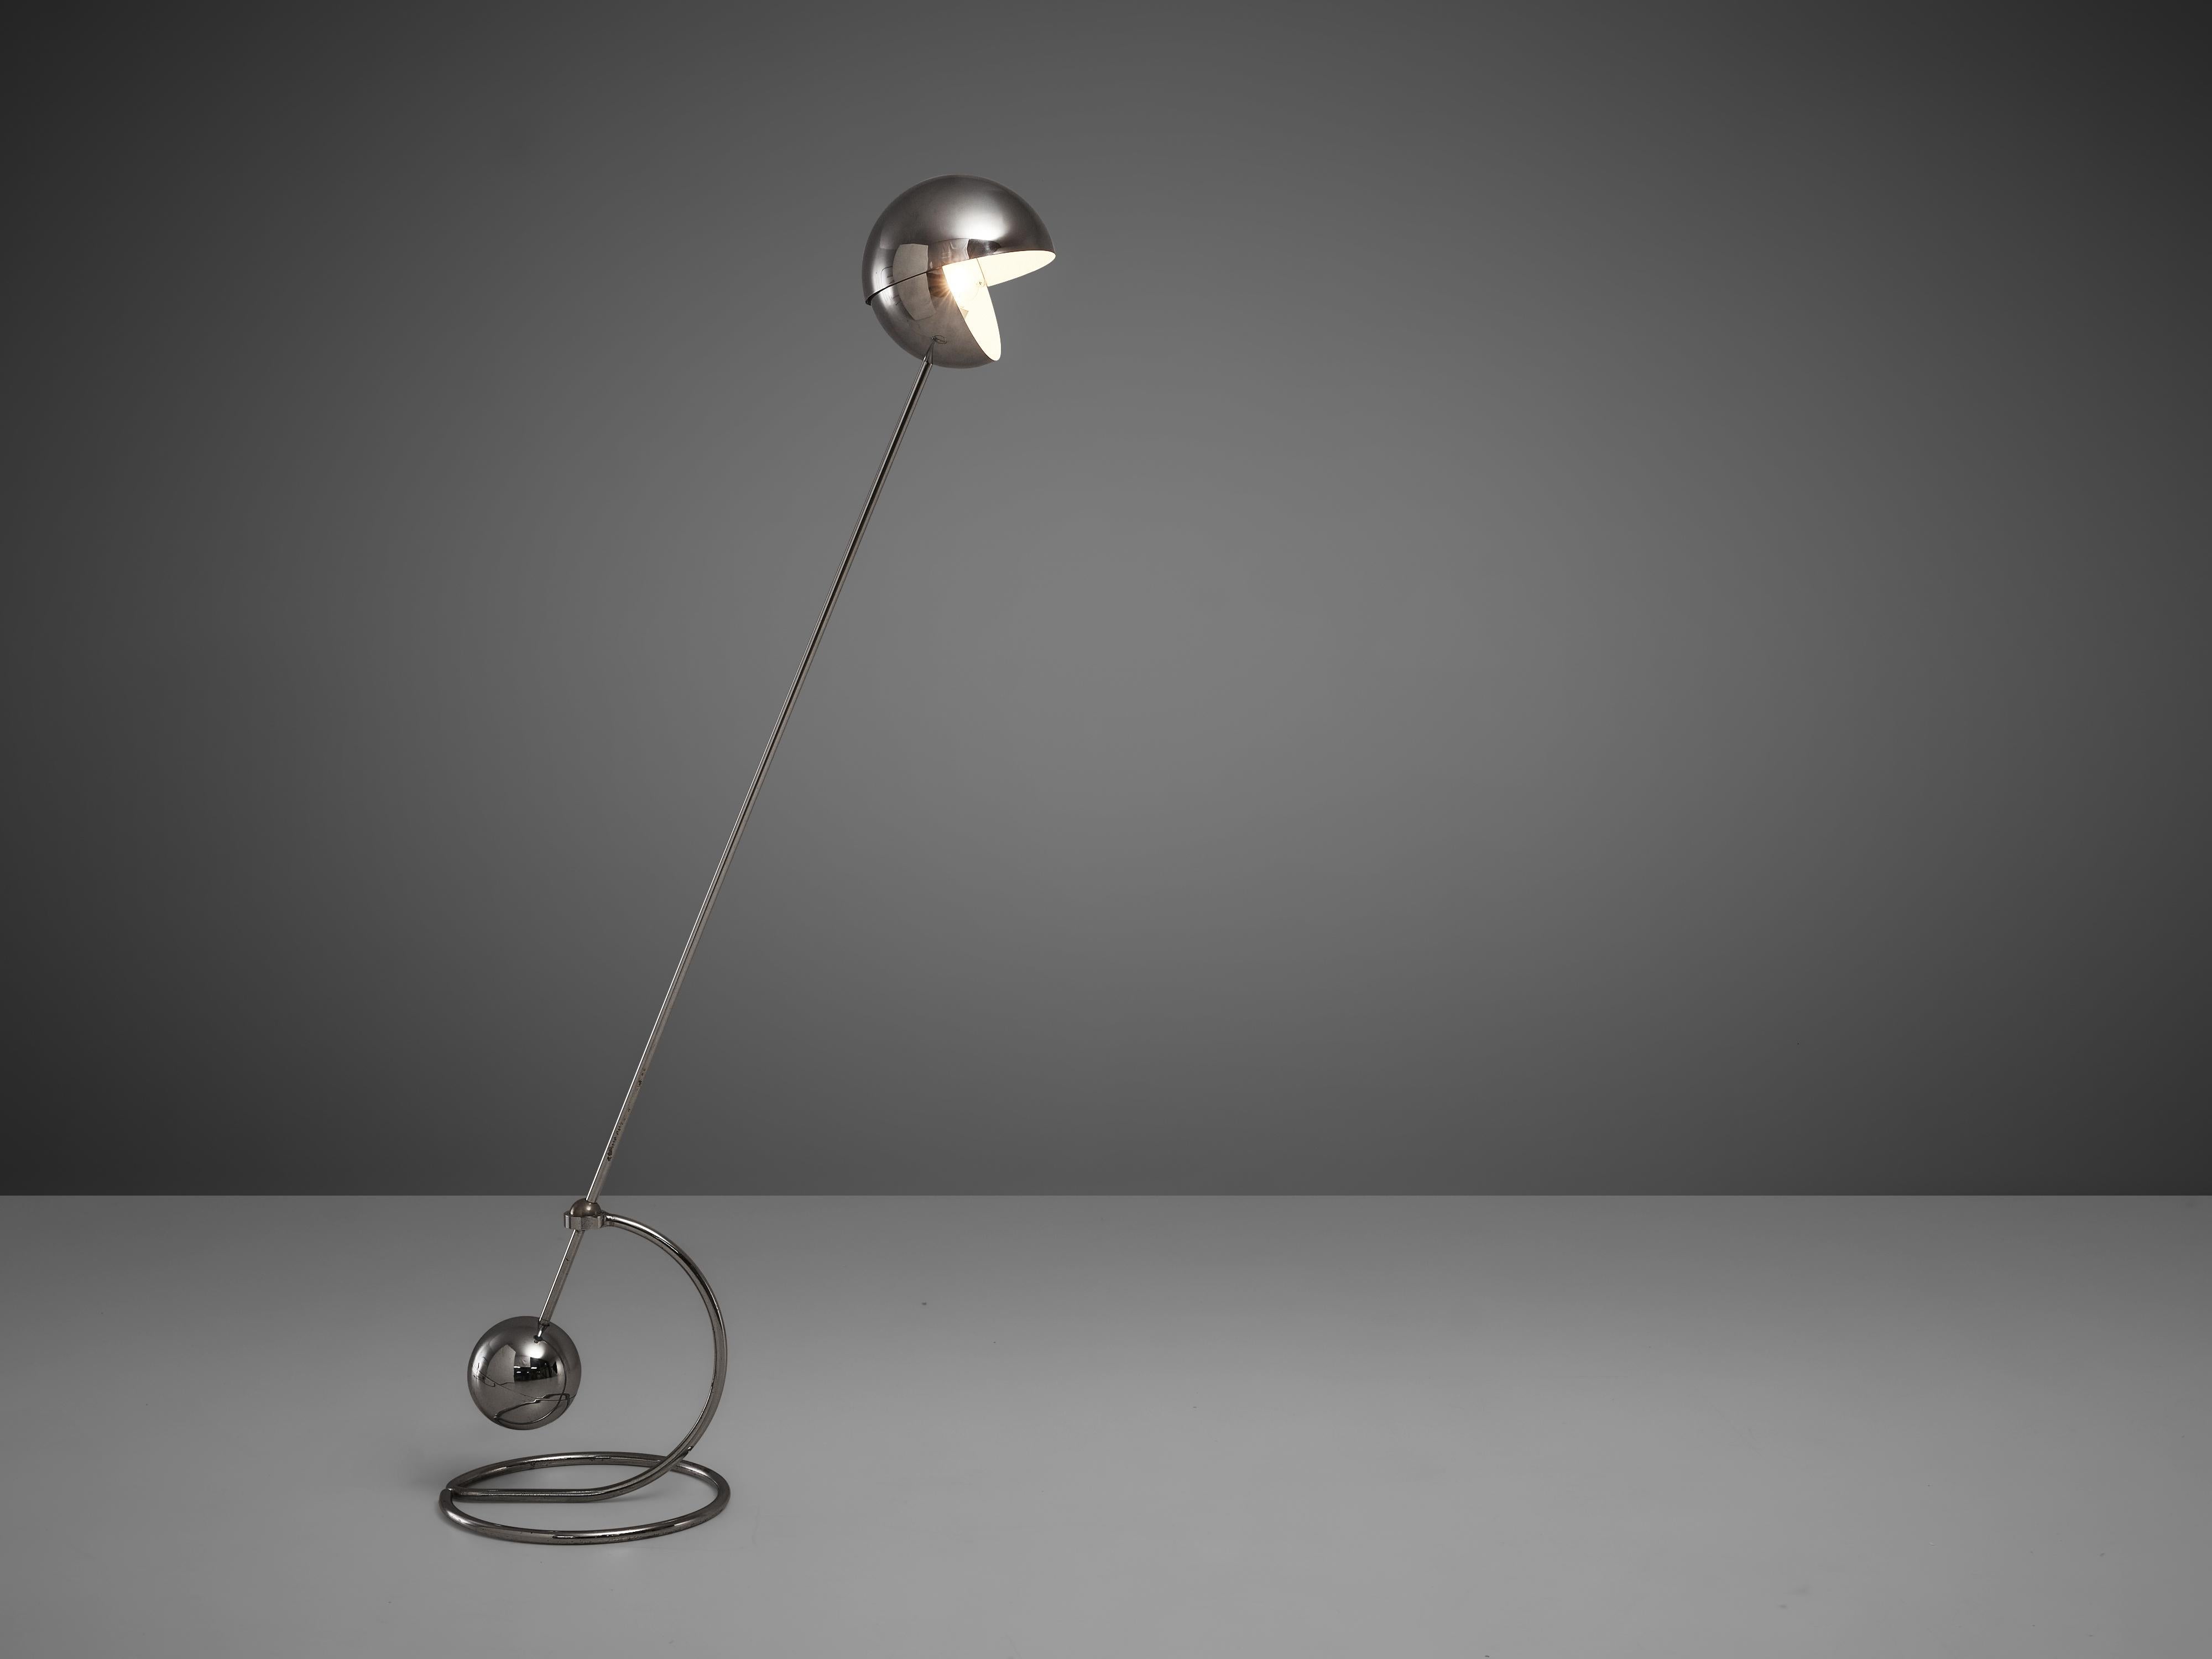 Paolo Tilche for Sirrah, floor lamp model 3S, chrome-plated metal, Italy, 1970s.

Stunning postmodern floor lamp by Italian designer Paolo Tilche. The lamp ‘3S’ relies on the function of a counterweight. A stem with a heavy sphere at the bottom end